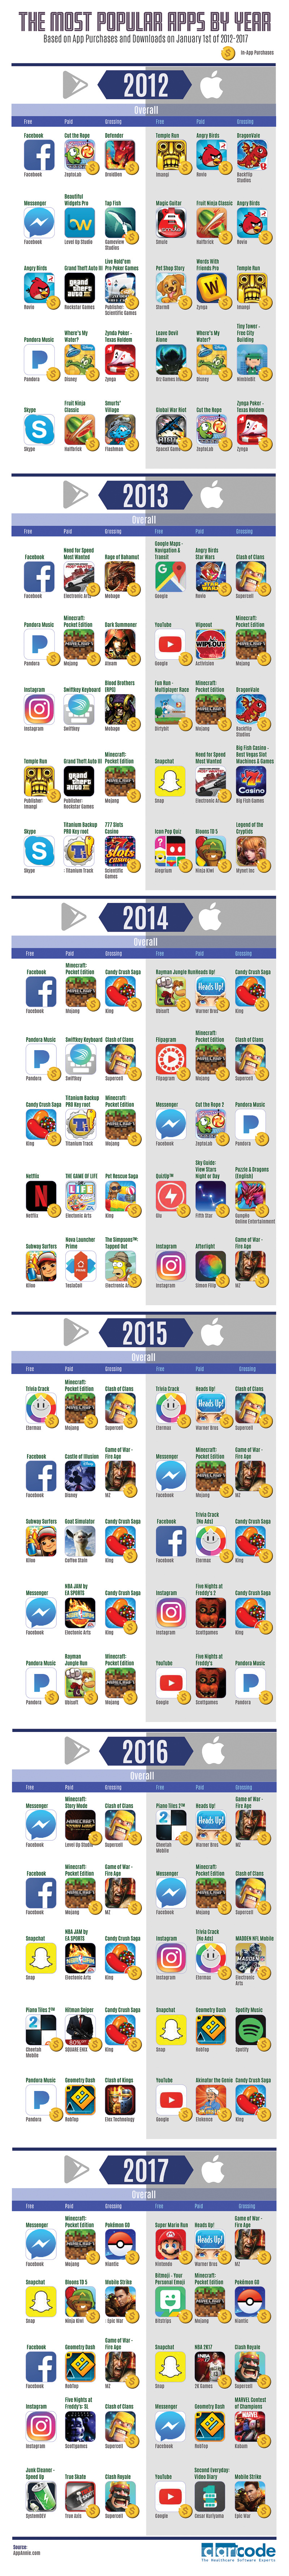 most-downloaded-apps-claricode